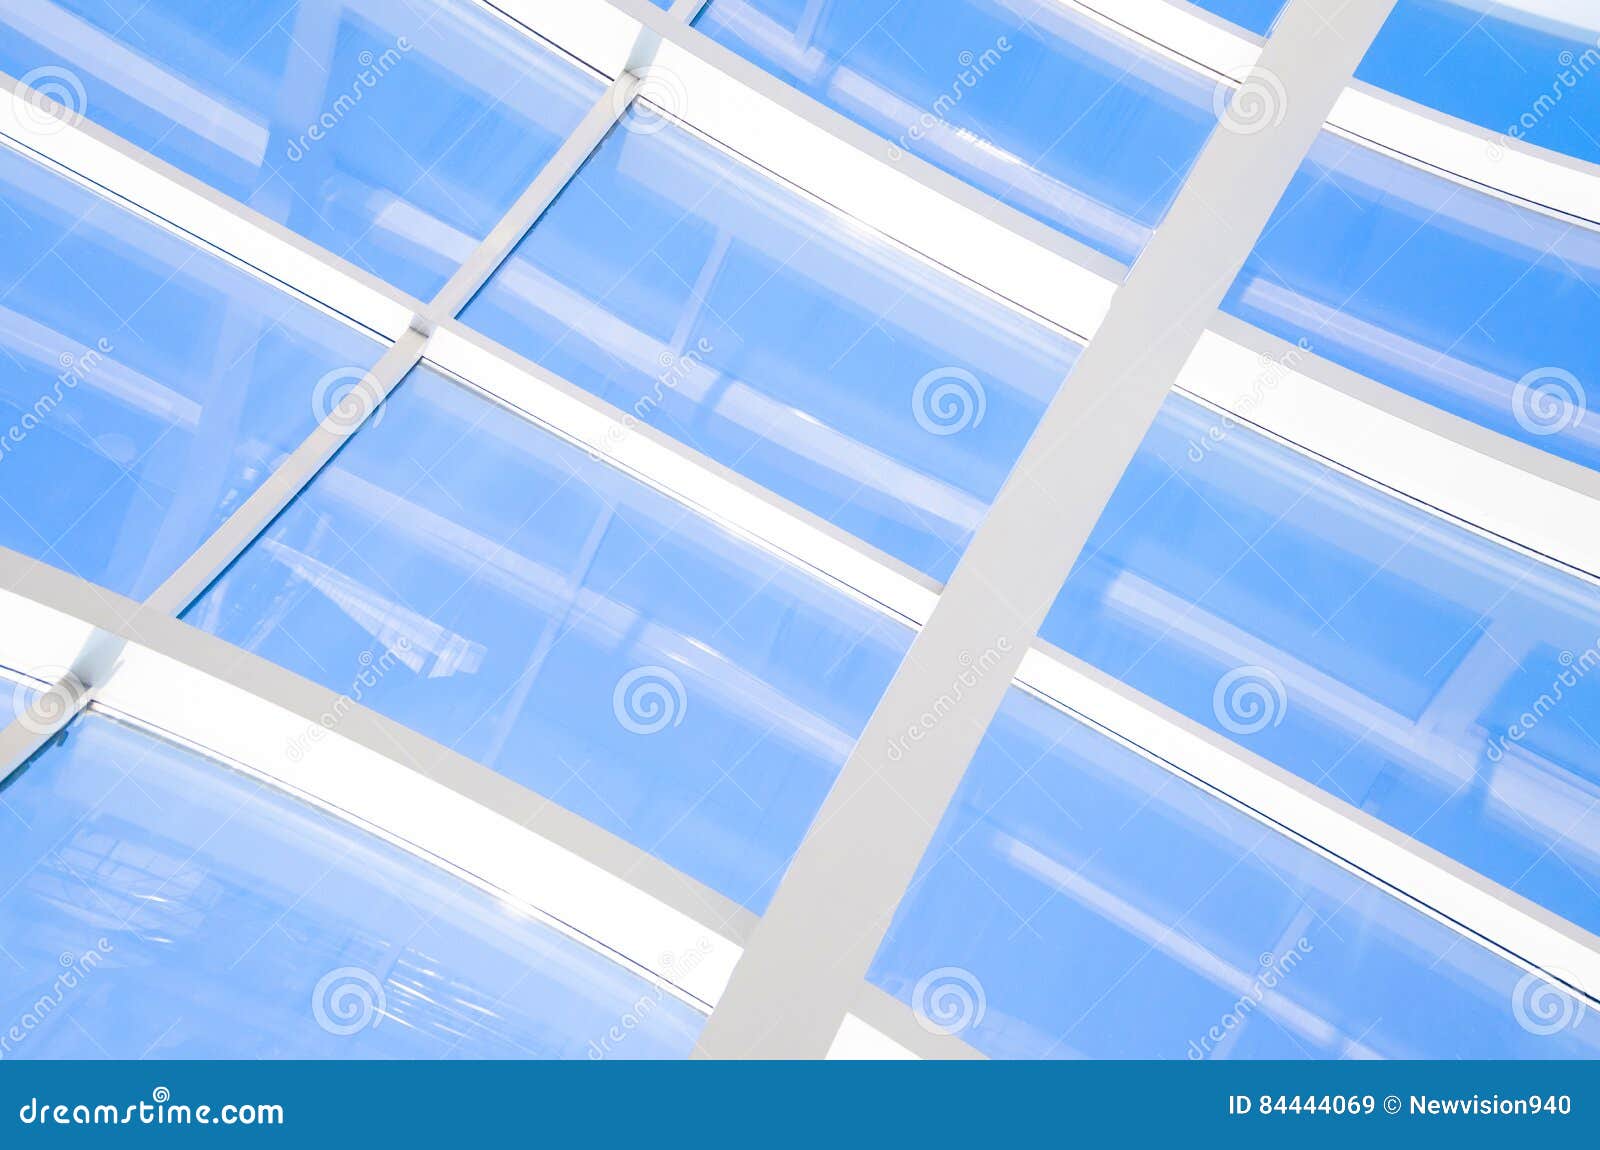 Geometric Blue Abstract Background with Triangles and Lines. Stock ...